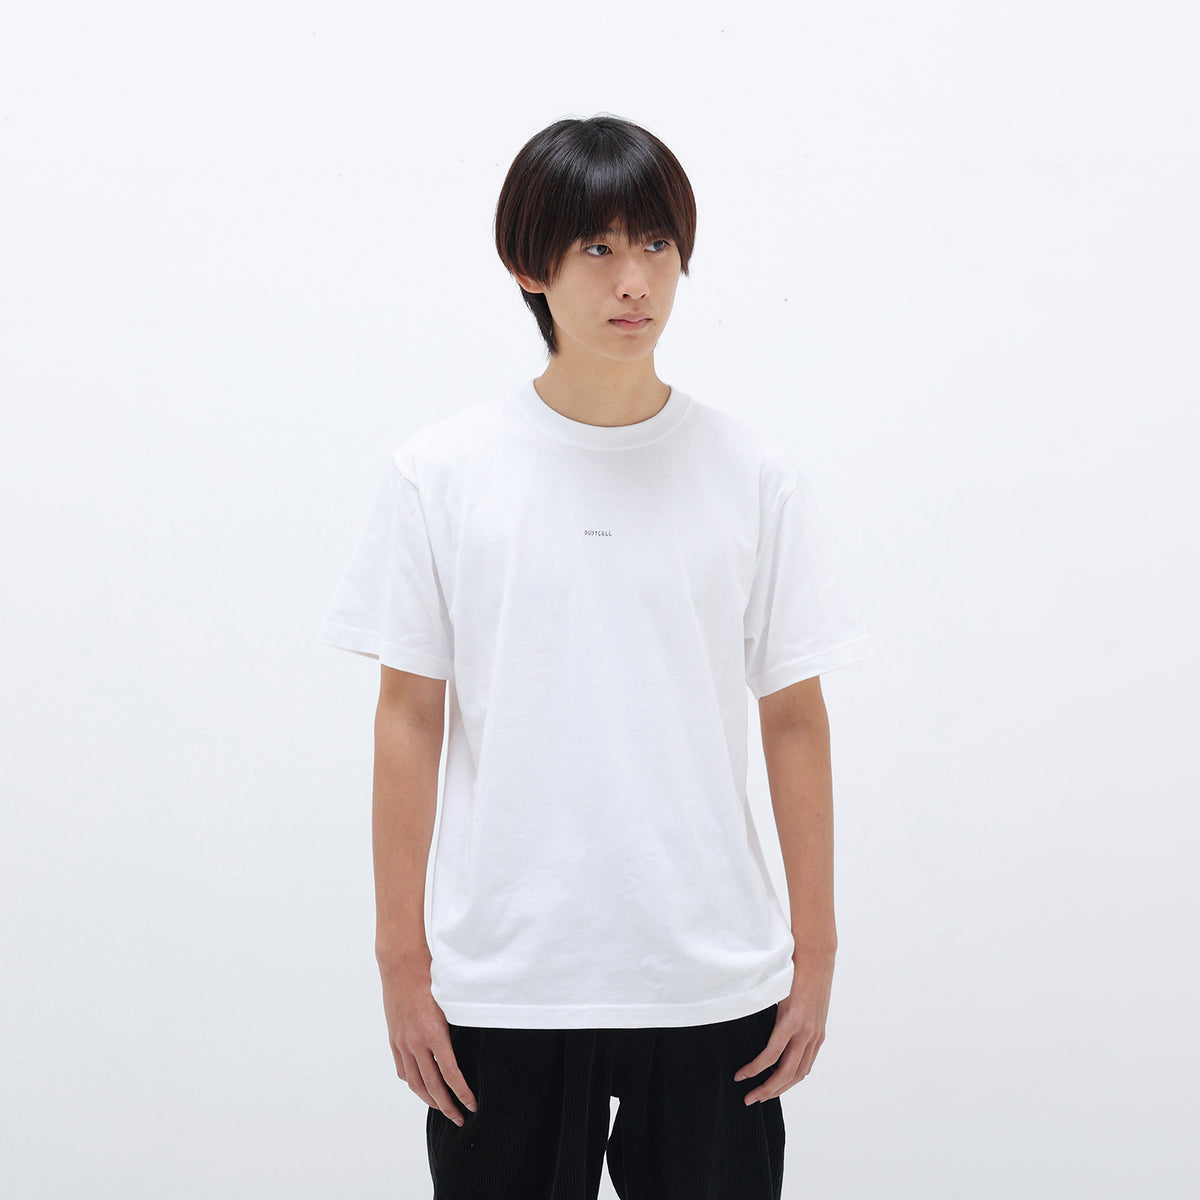 【DUSTCELL】復刻版ロゴTシャツ 4th Anniversary ver.／WHITE／Blu-ray「ROUND TRIP」＆ 4t